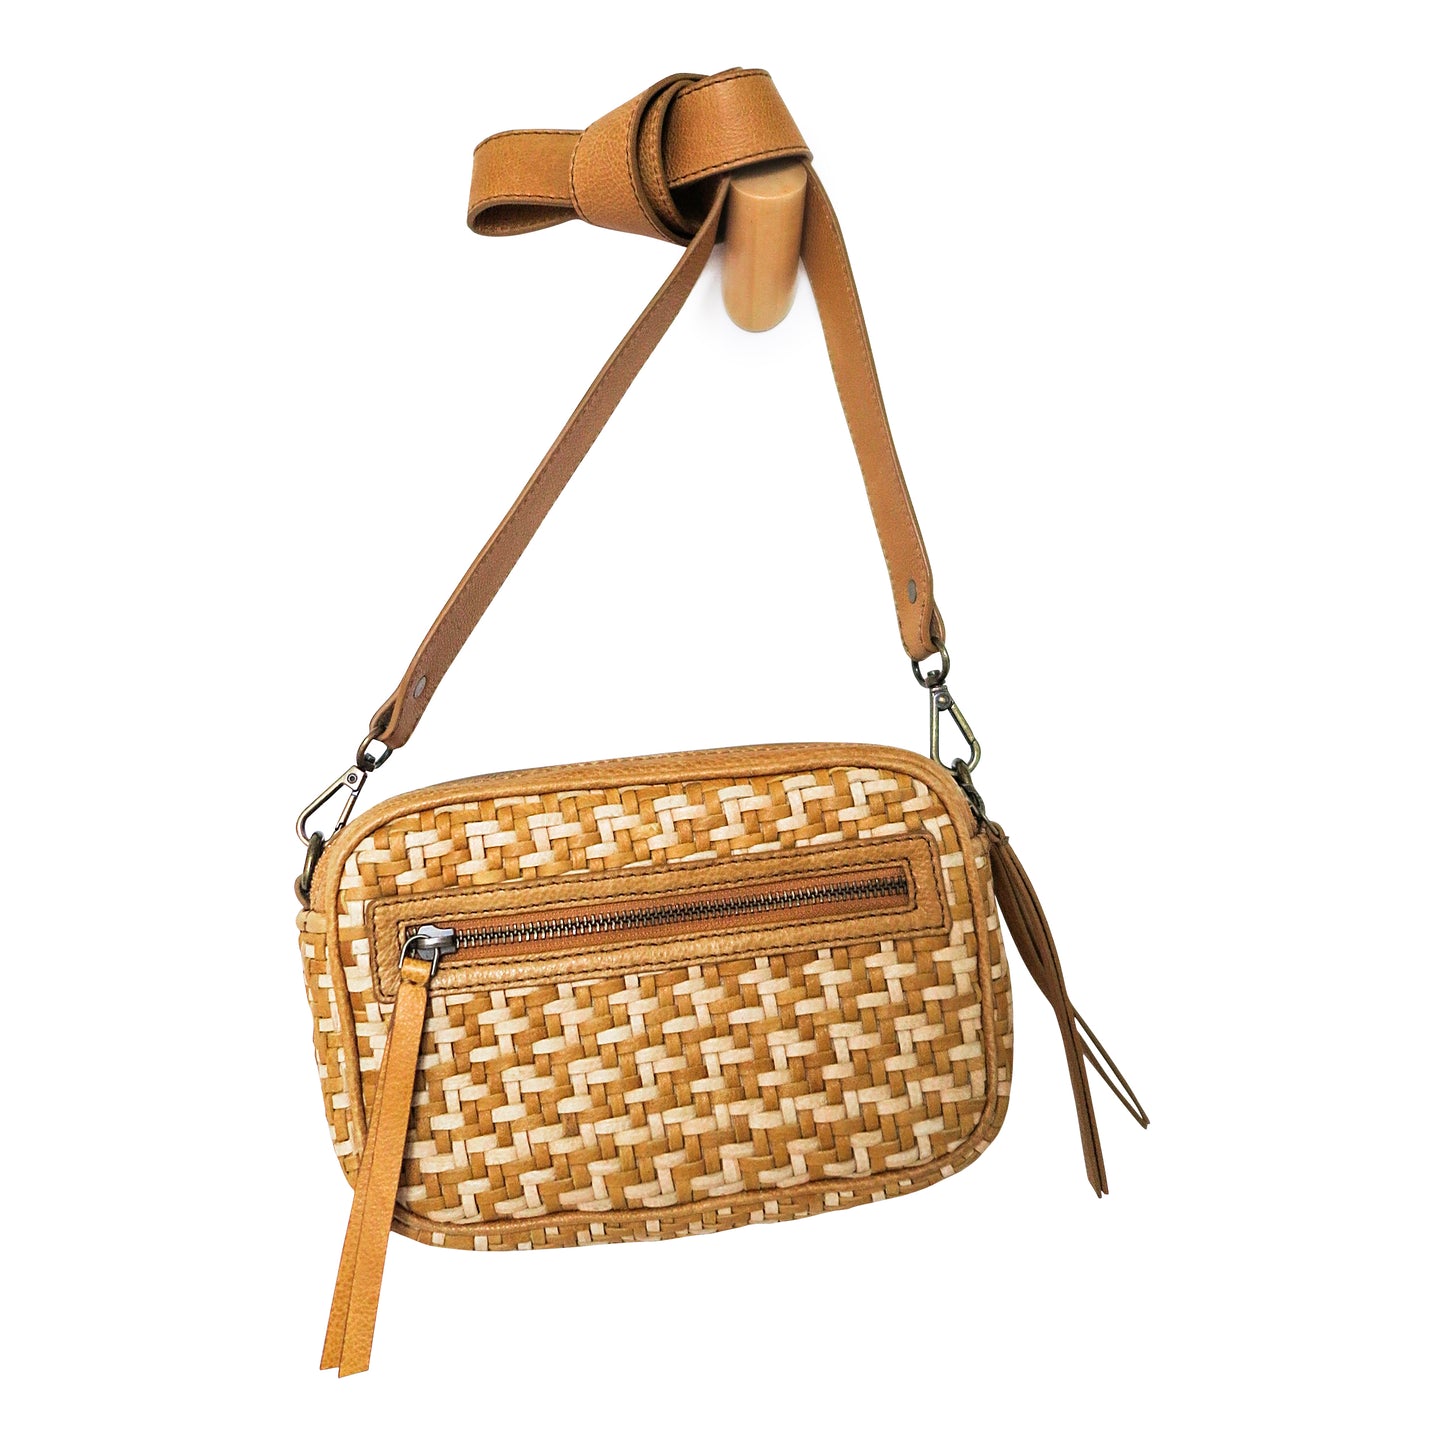 Bea Woven Leather Camera Crossbody Bag in Yellow/Beige